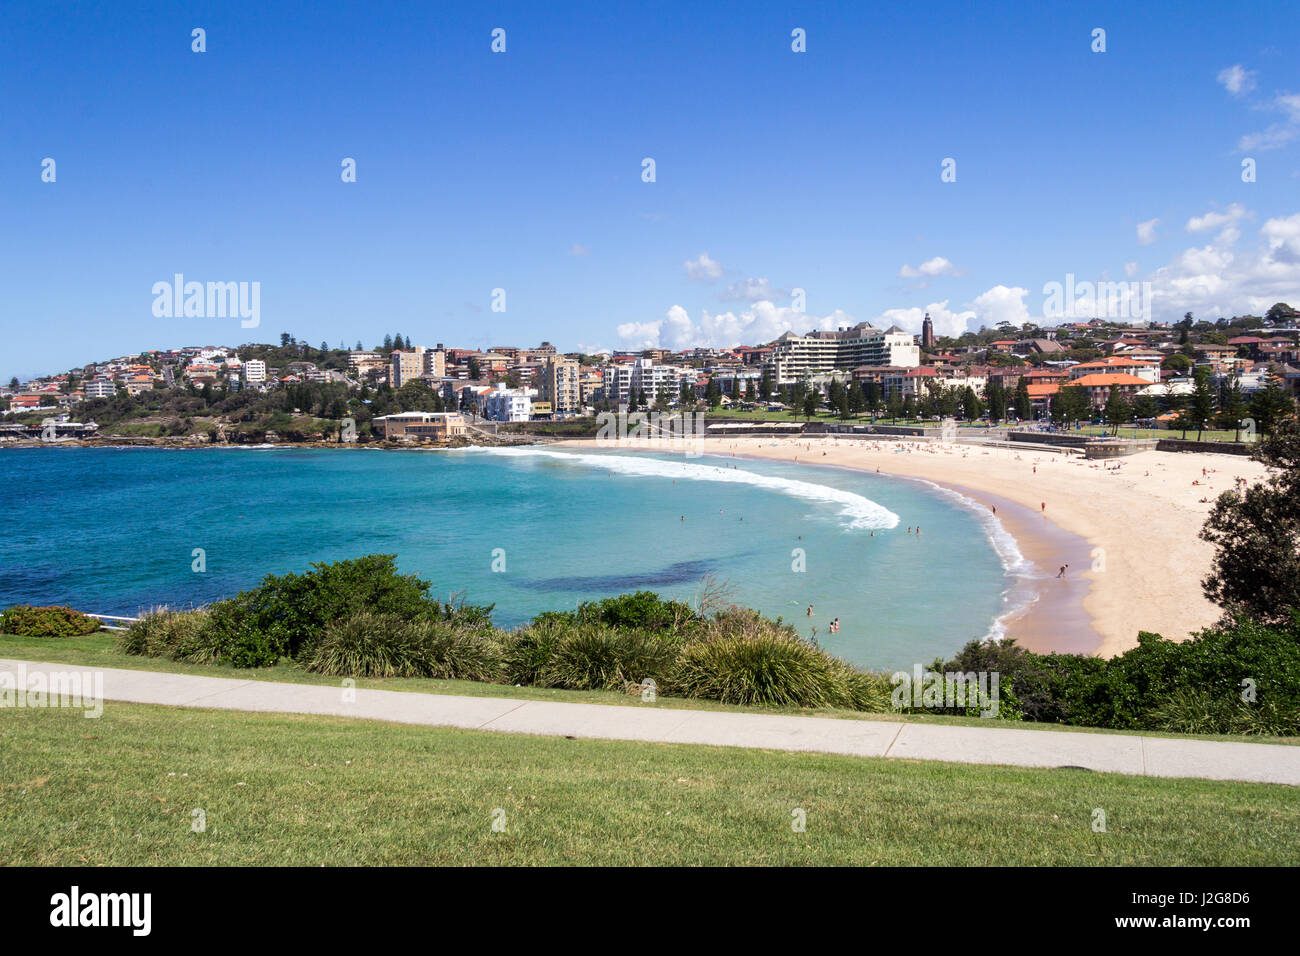 Yucca flowers with people swimming in the sea and sunbathing on the beach, Coogee, Sydney, New SOuth Wales, Australia Stock Photo